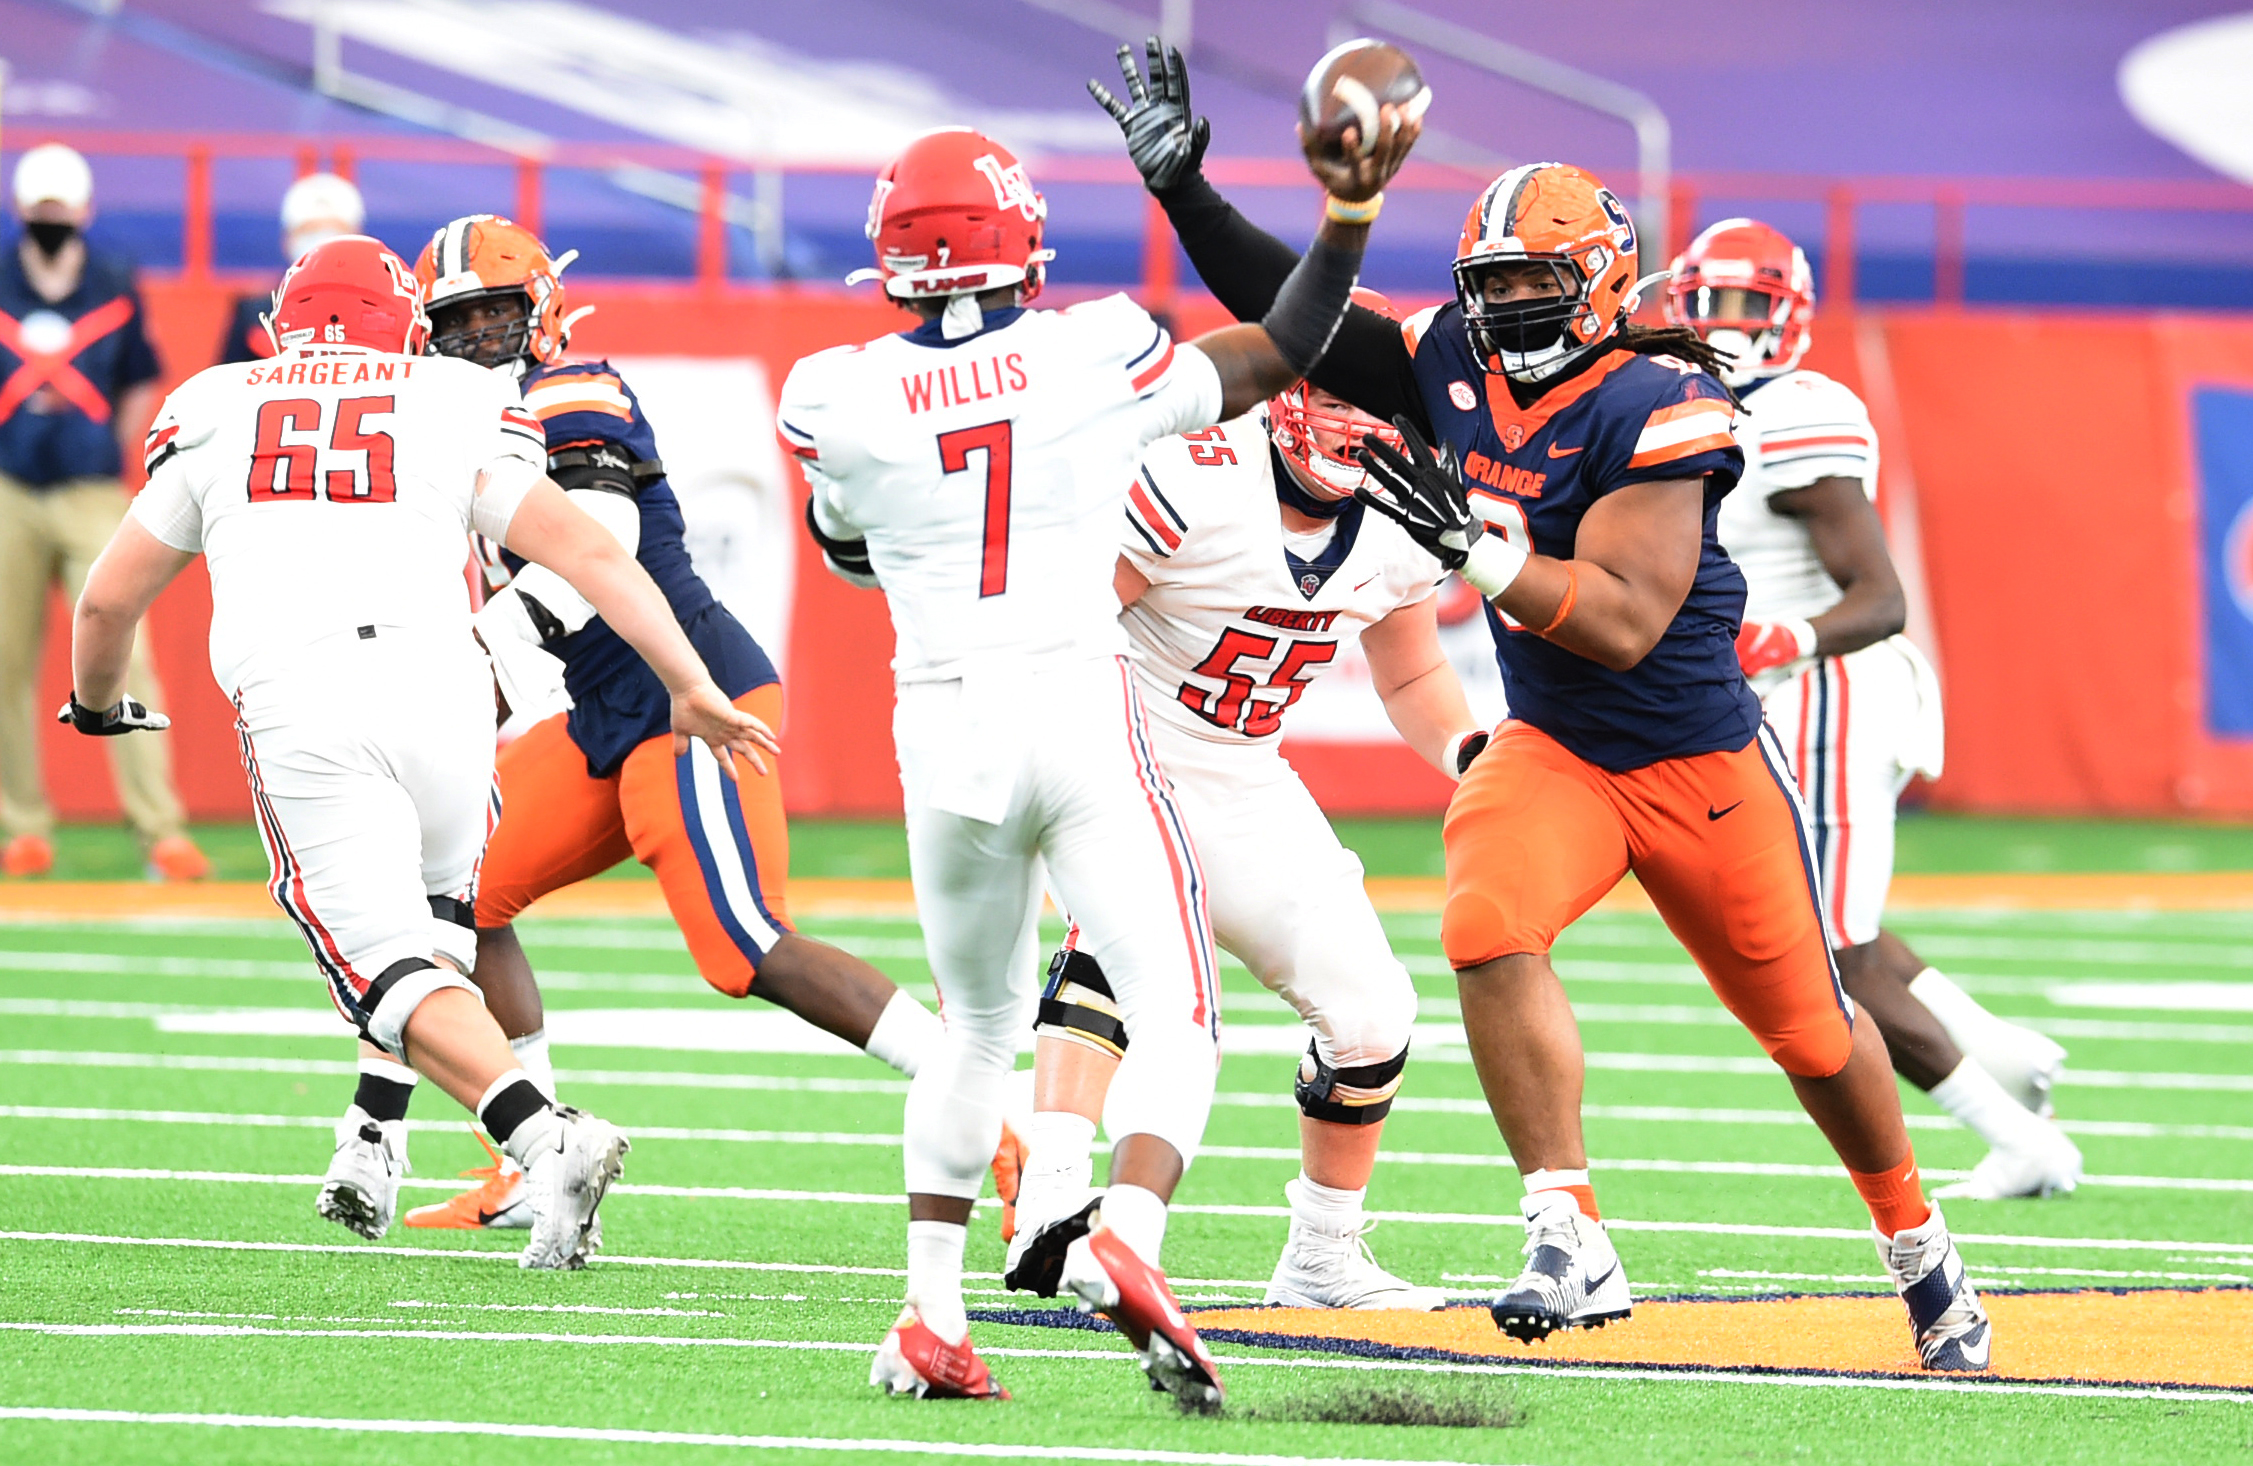 The Orange takes on the Blue Devils on Saturday, Oct. 10, 2020, at the Carrier Dome